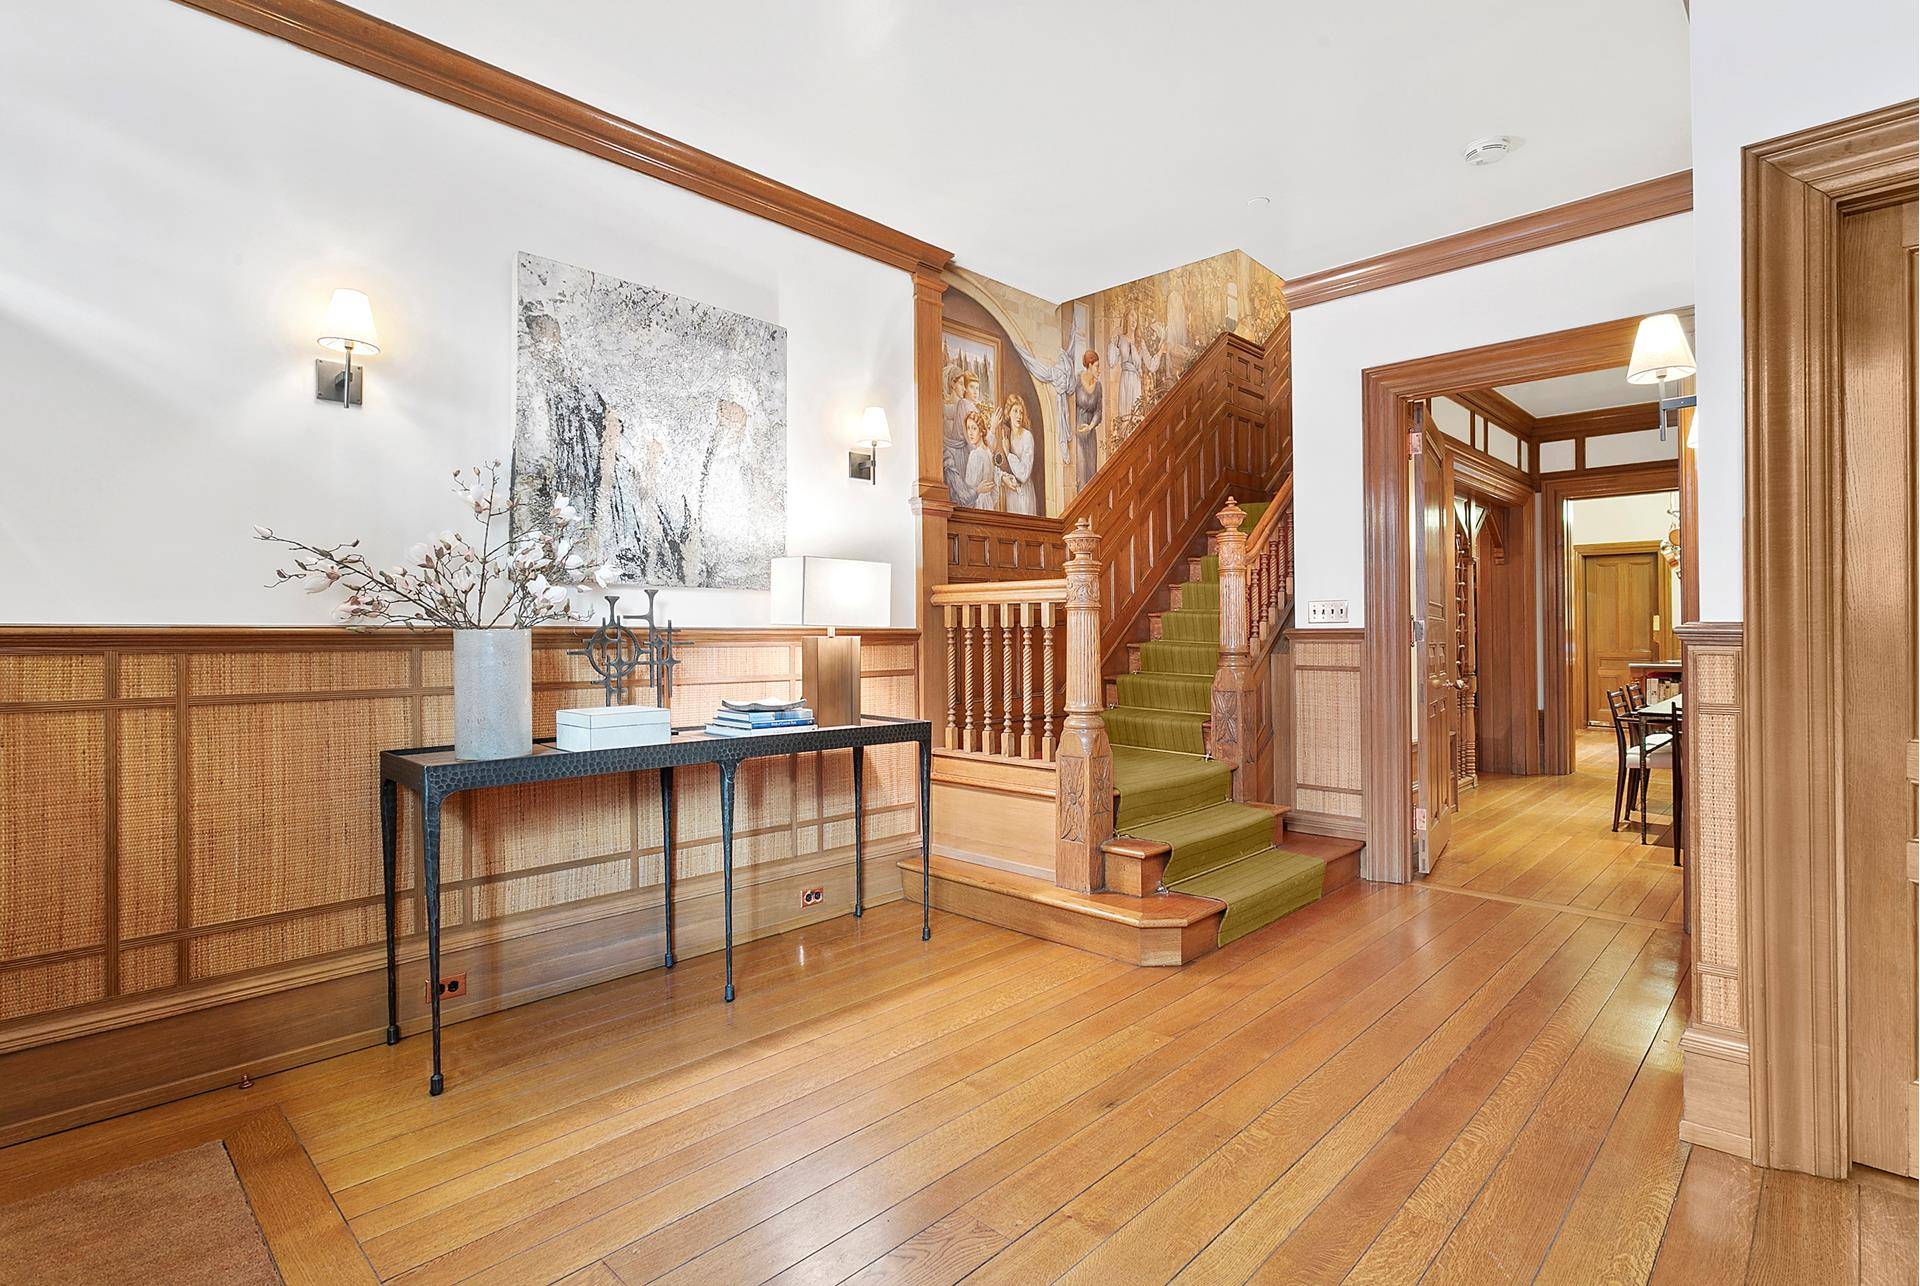 This stunning townhouse is located on tree lined 95th Street between 5th and Madison Avenues.